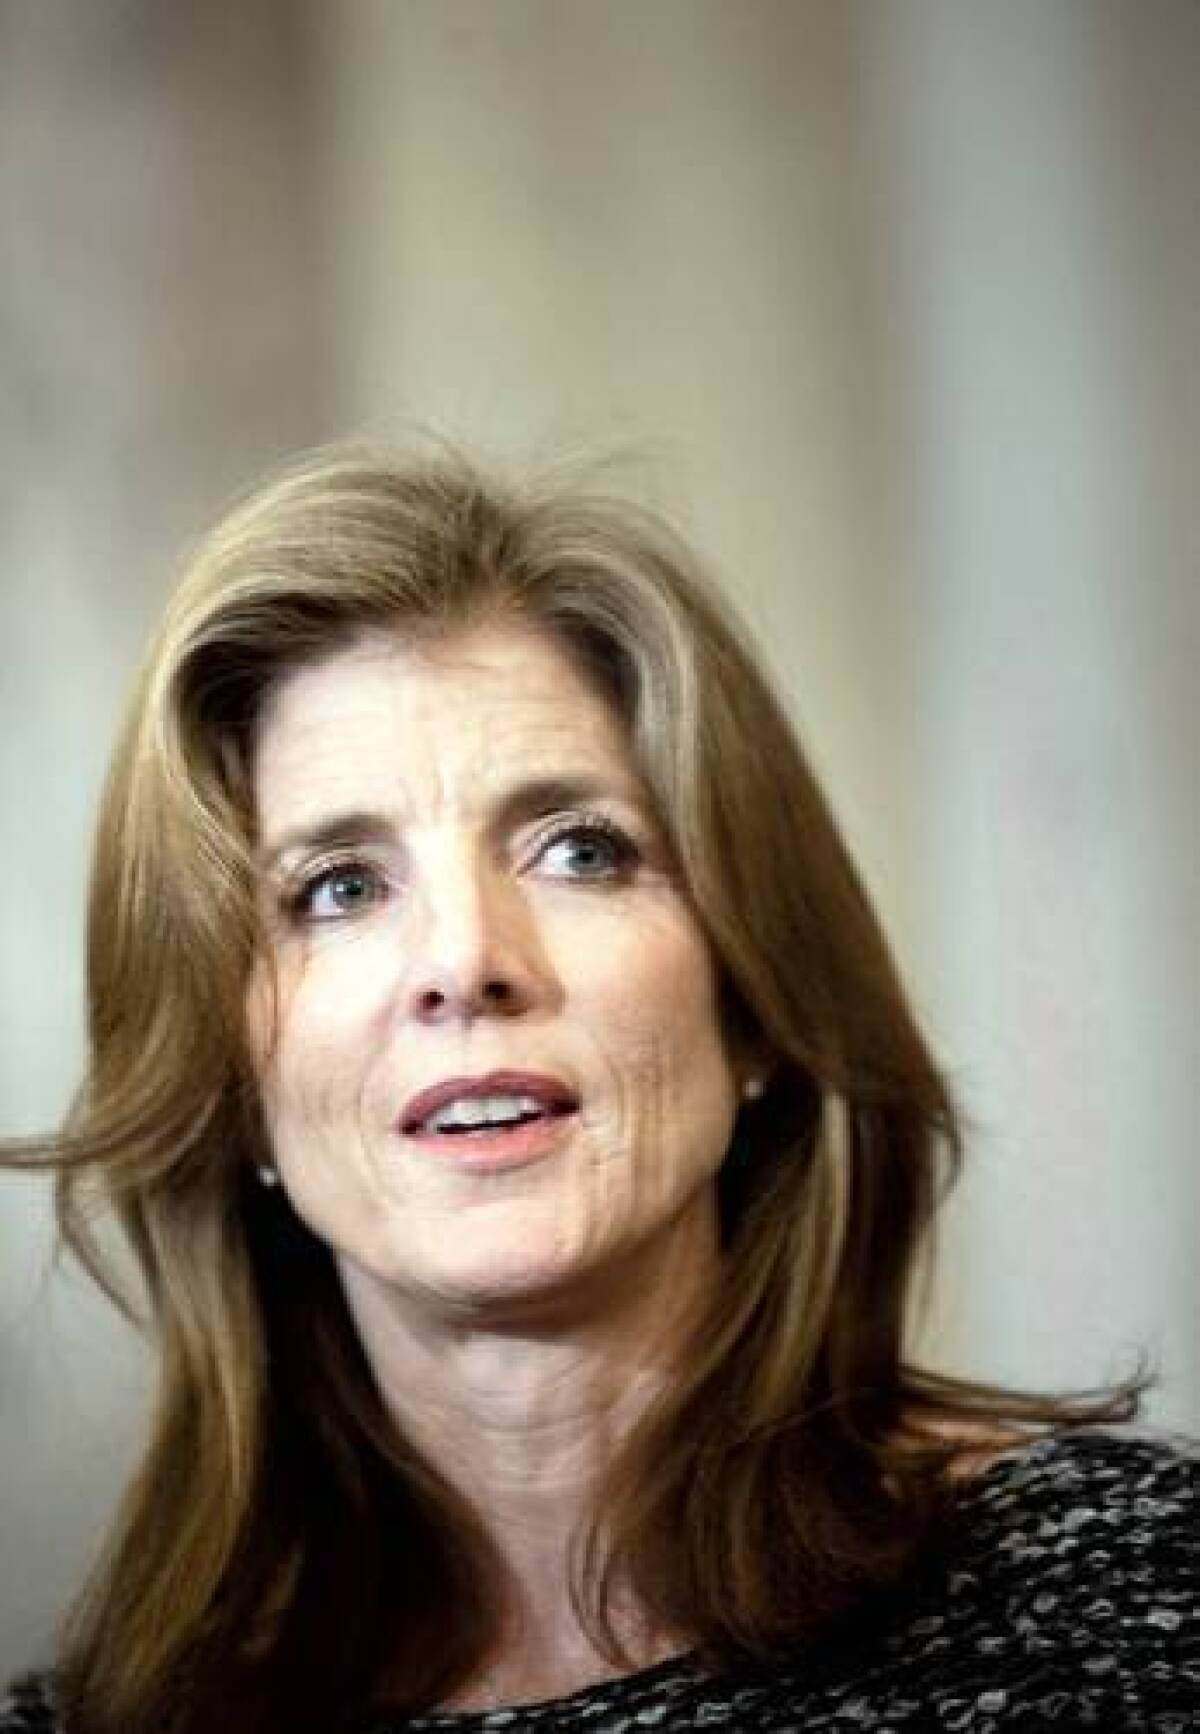 The Japanese government has already formally approved Caroline Kennedy as the next U.S. ambassador to Japan, though her nomination must still be approved by the U.S. Senate.